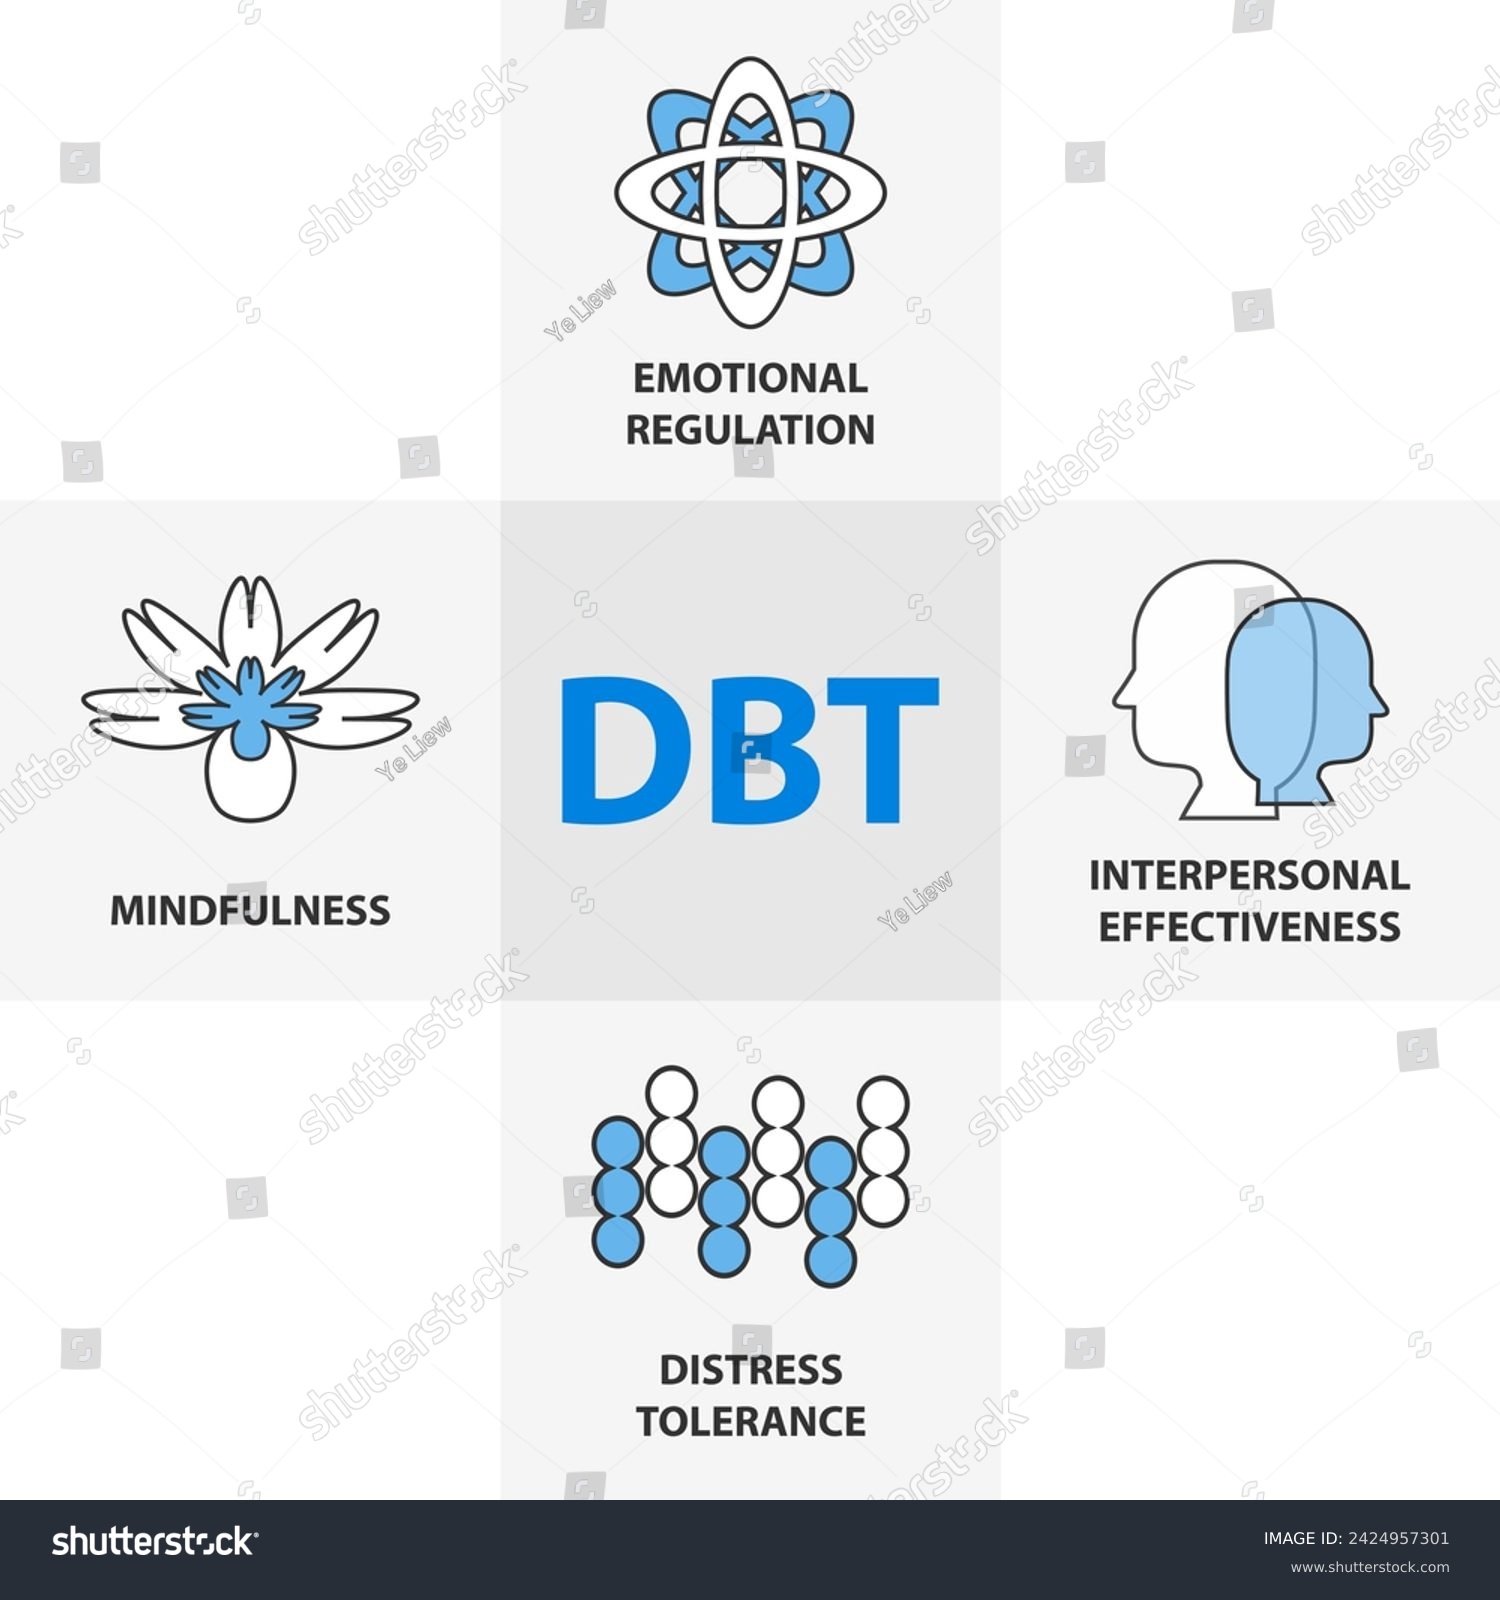 SVG of Dialectical Behavioral Therapy (DBT) concept. It is a type of Cognitive Behavioral Therapy (CBT) that teaches people to be in the moment and stress regulation. svg